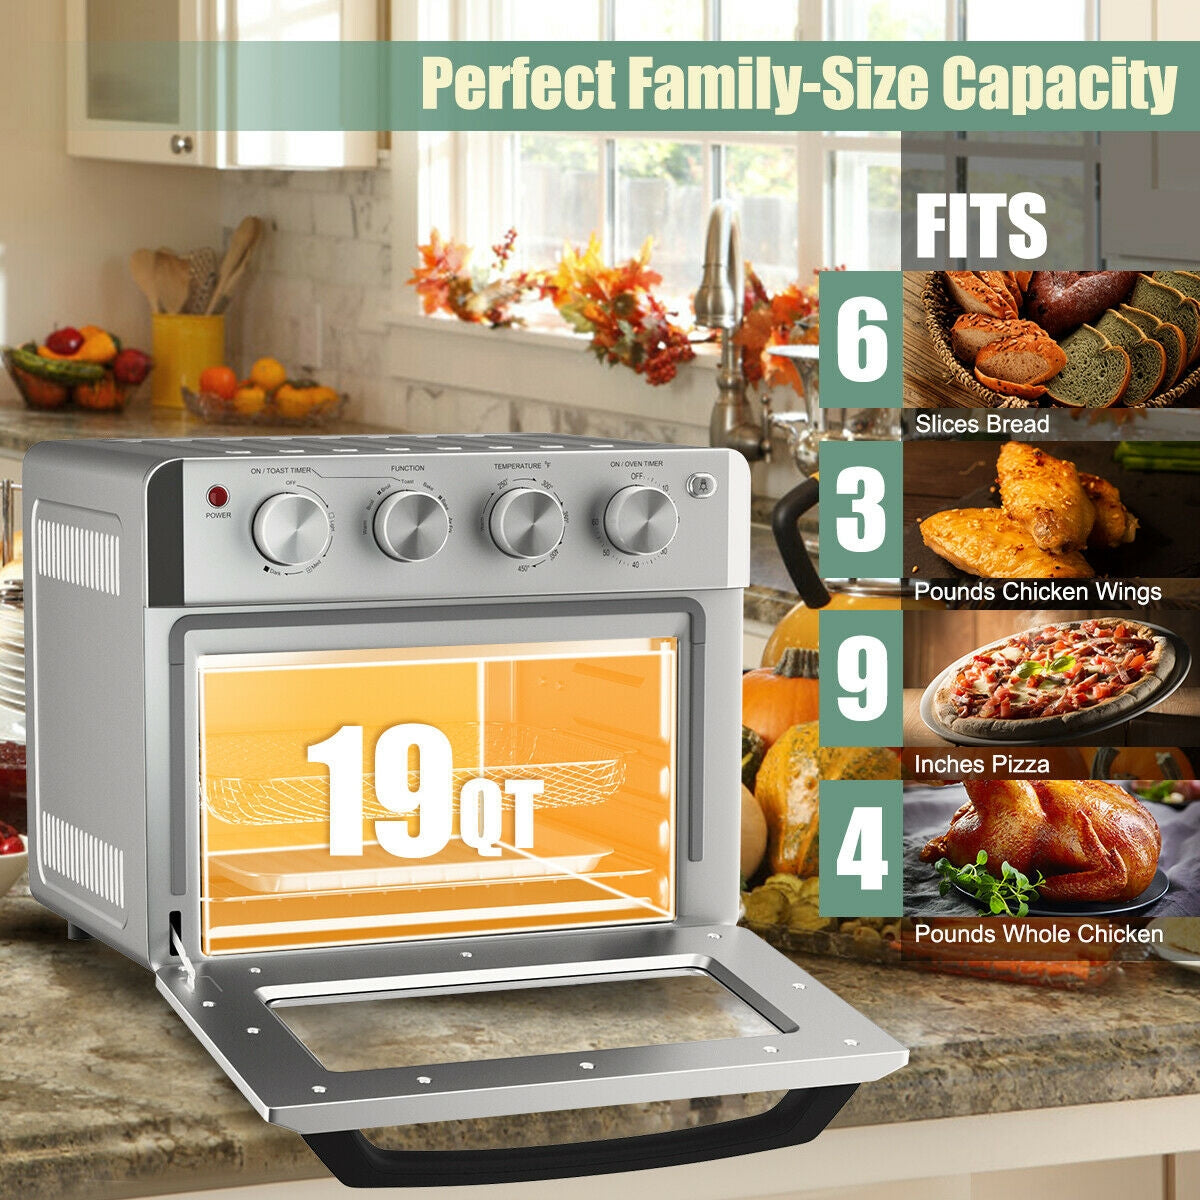 Generous Family Size with Enhanced Safety: Our air fryer toaster oven boasts a spacious 19-quart interior that can accommodate six slices of toast, a 9-inch pizza, three pounds of chicken wings, or a four-pound chicken, making it ideal for family meals. Non-slip foot pads, a heat-resistant handle, and an oven mitt provide added safety and peace of mind.